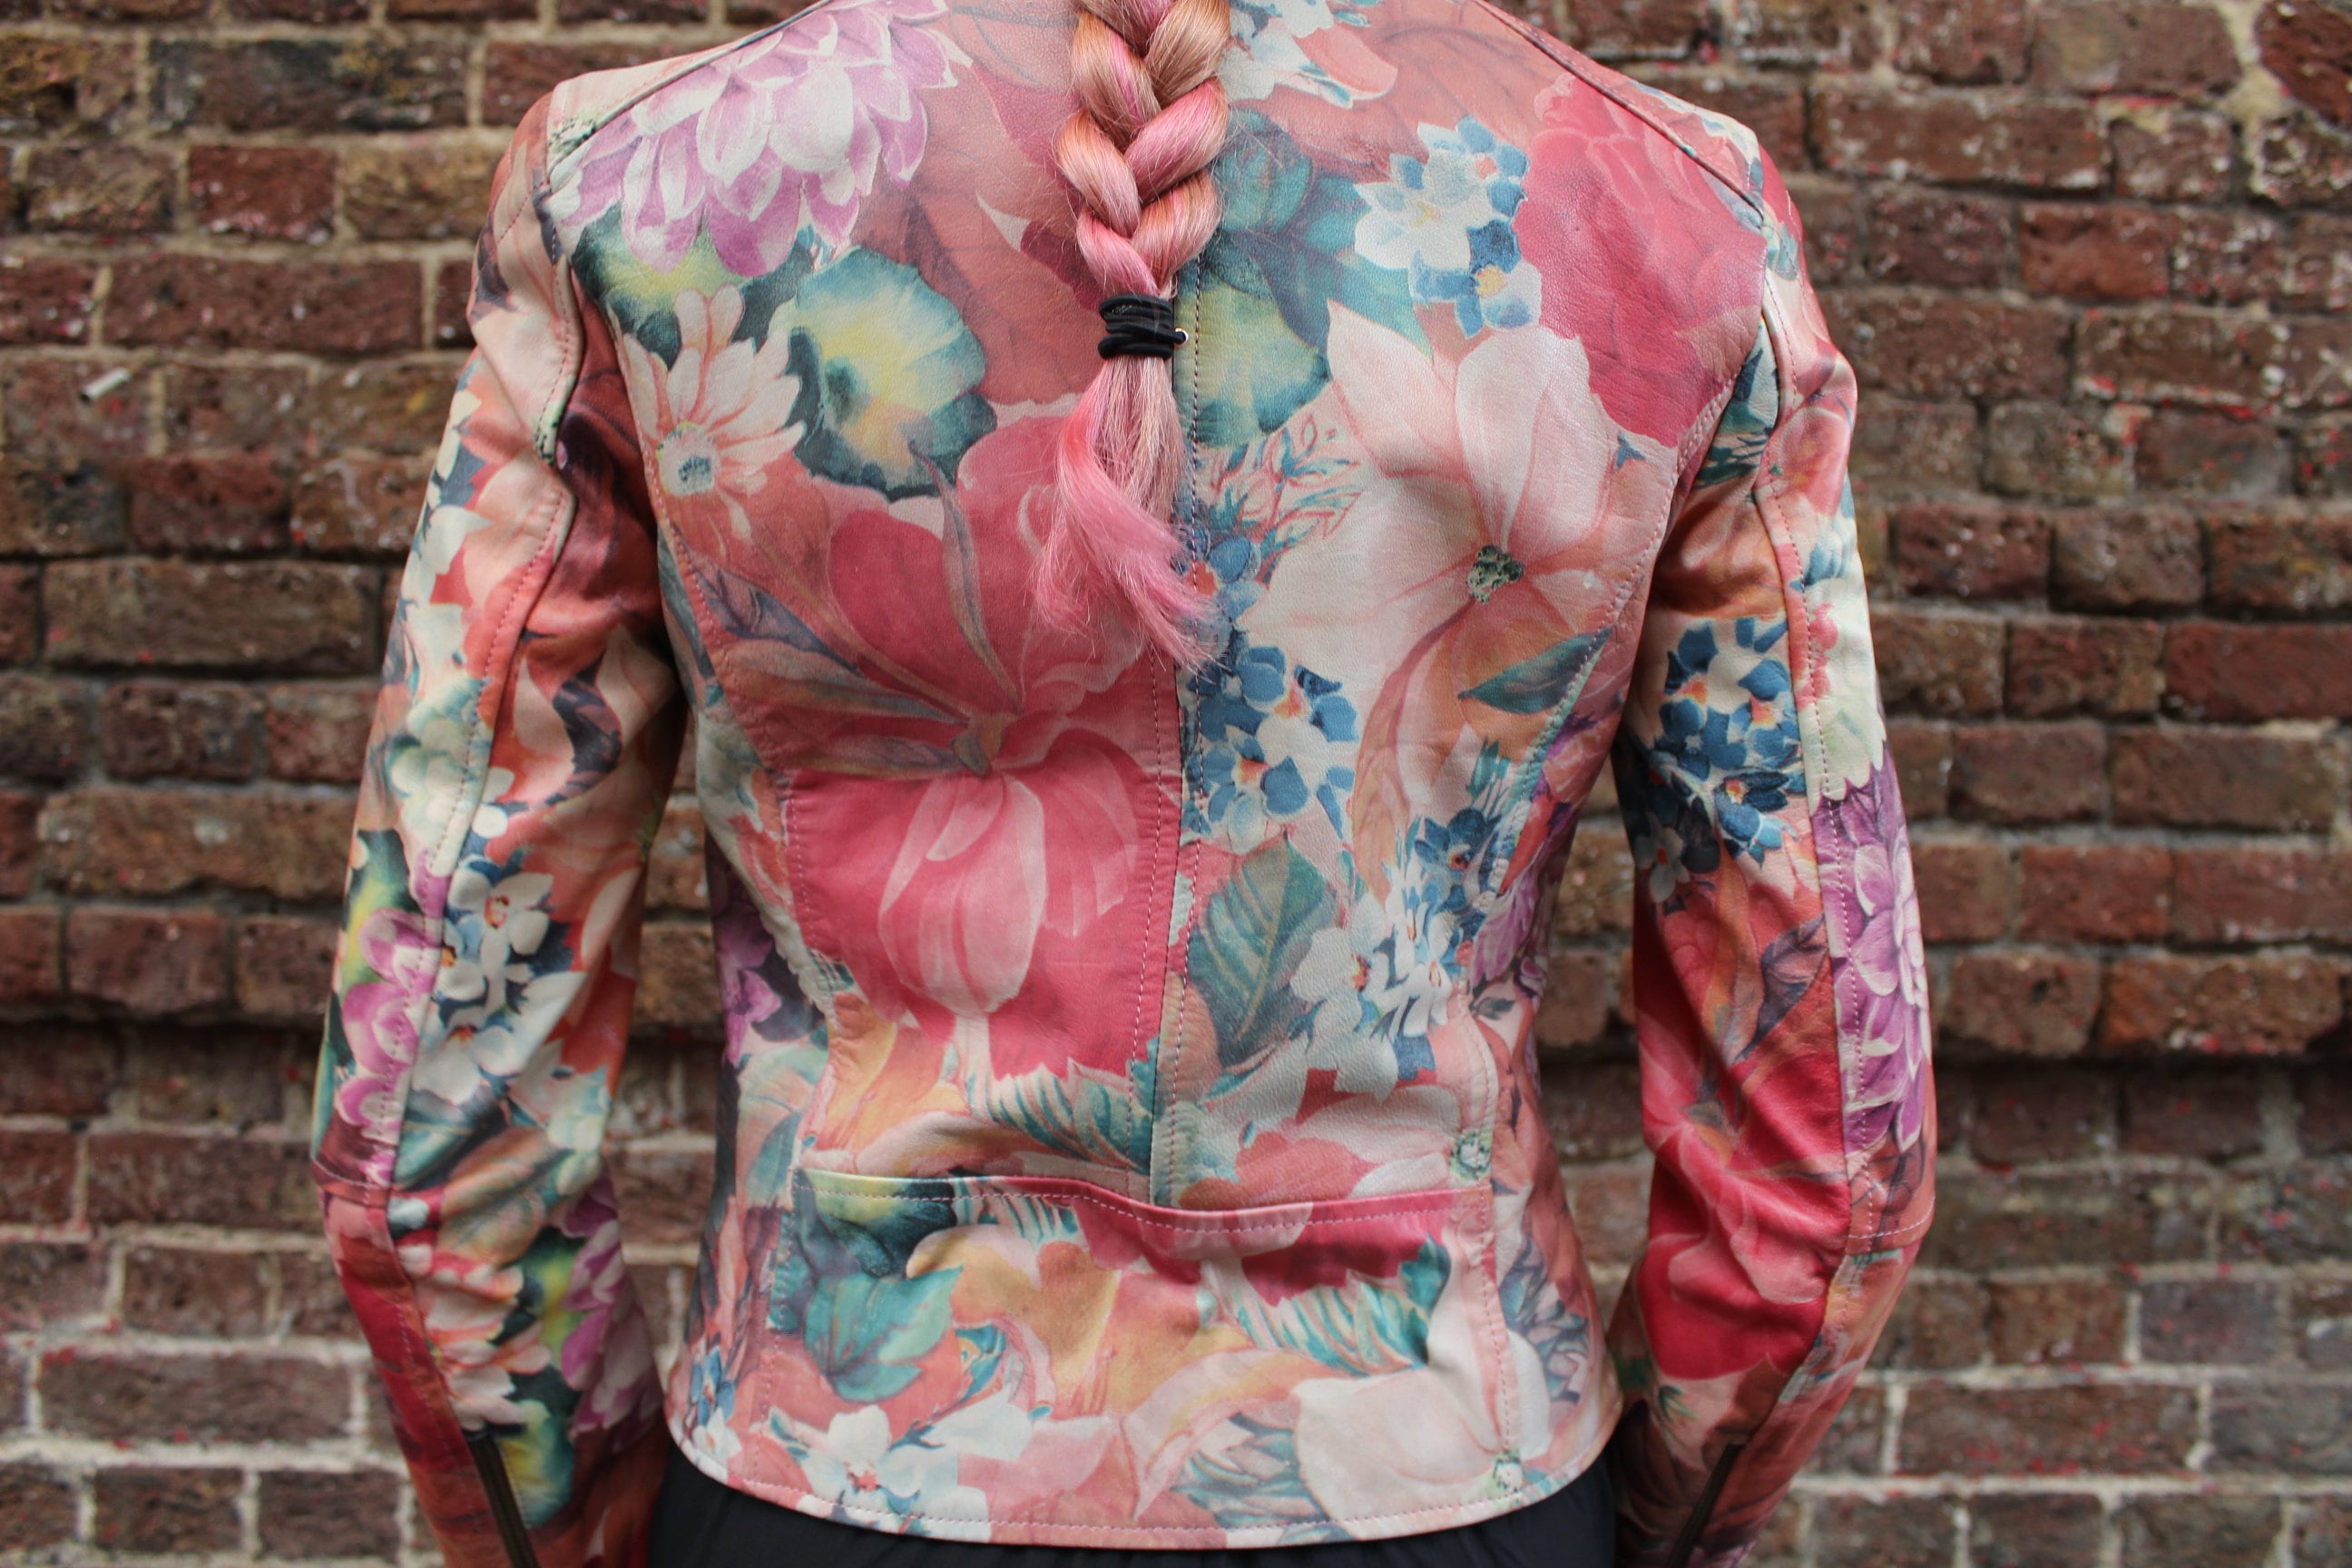 Biker Jacket With French Pink and Blue Art Printed Leather 